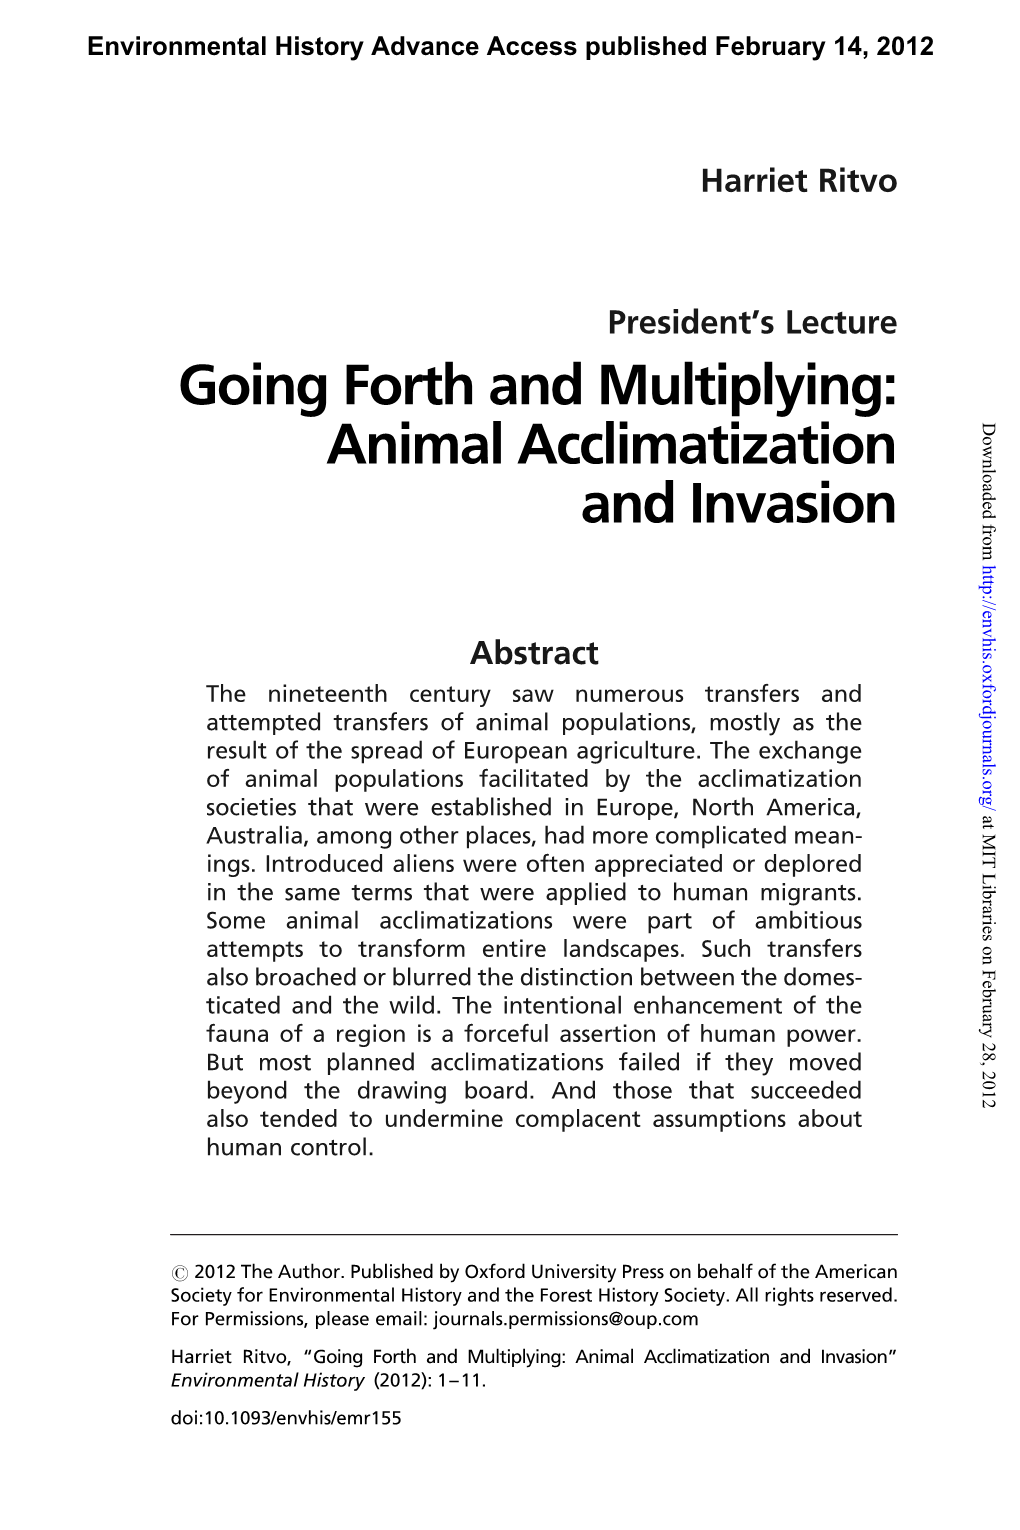 Going Forth and Multiplying: Animal Acclimatization and Invasion” Environmental History (2012): 1–11